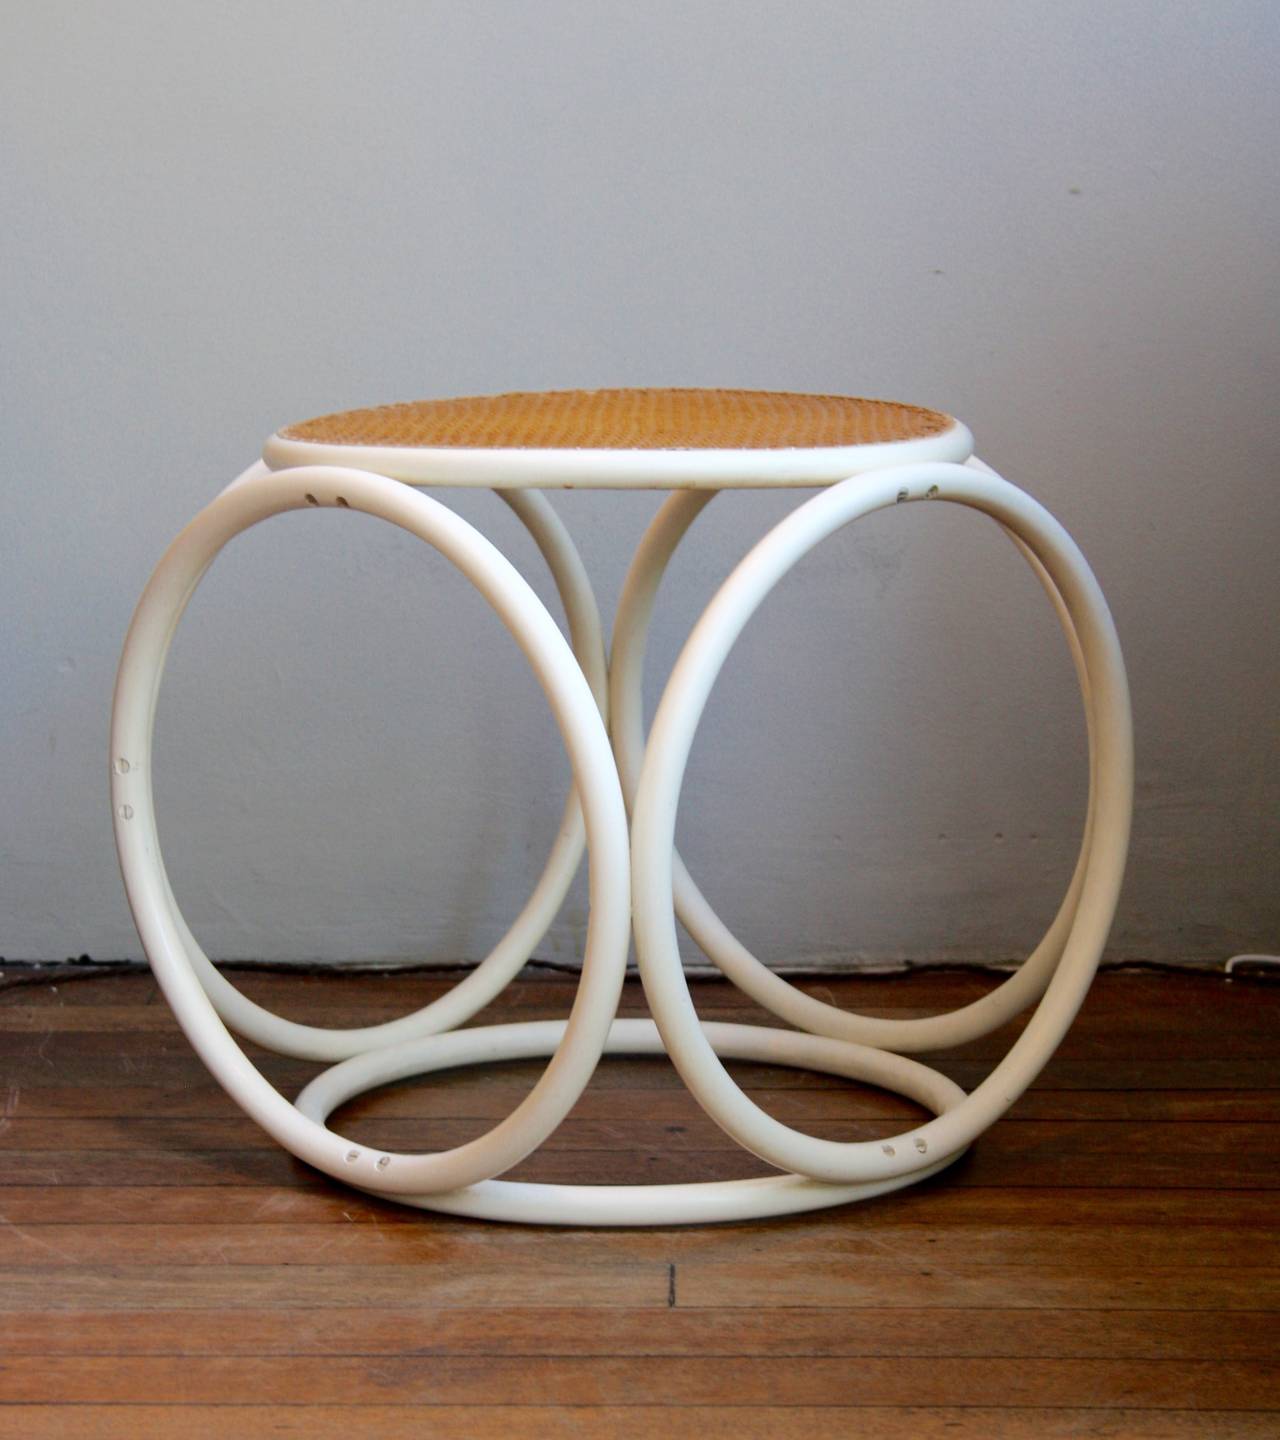 Ottoman in white painted steam bent wood with a cane seat designed by the Austrian pioneer of furniture construction, Michael Thonet.